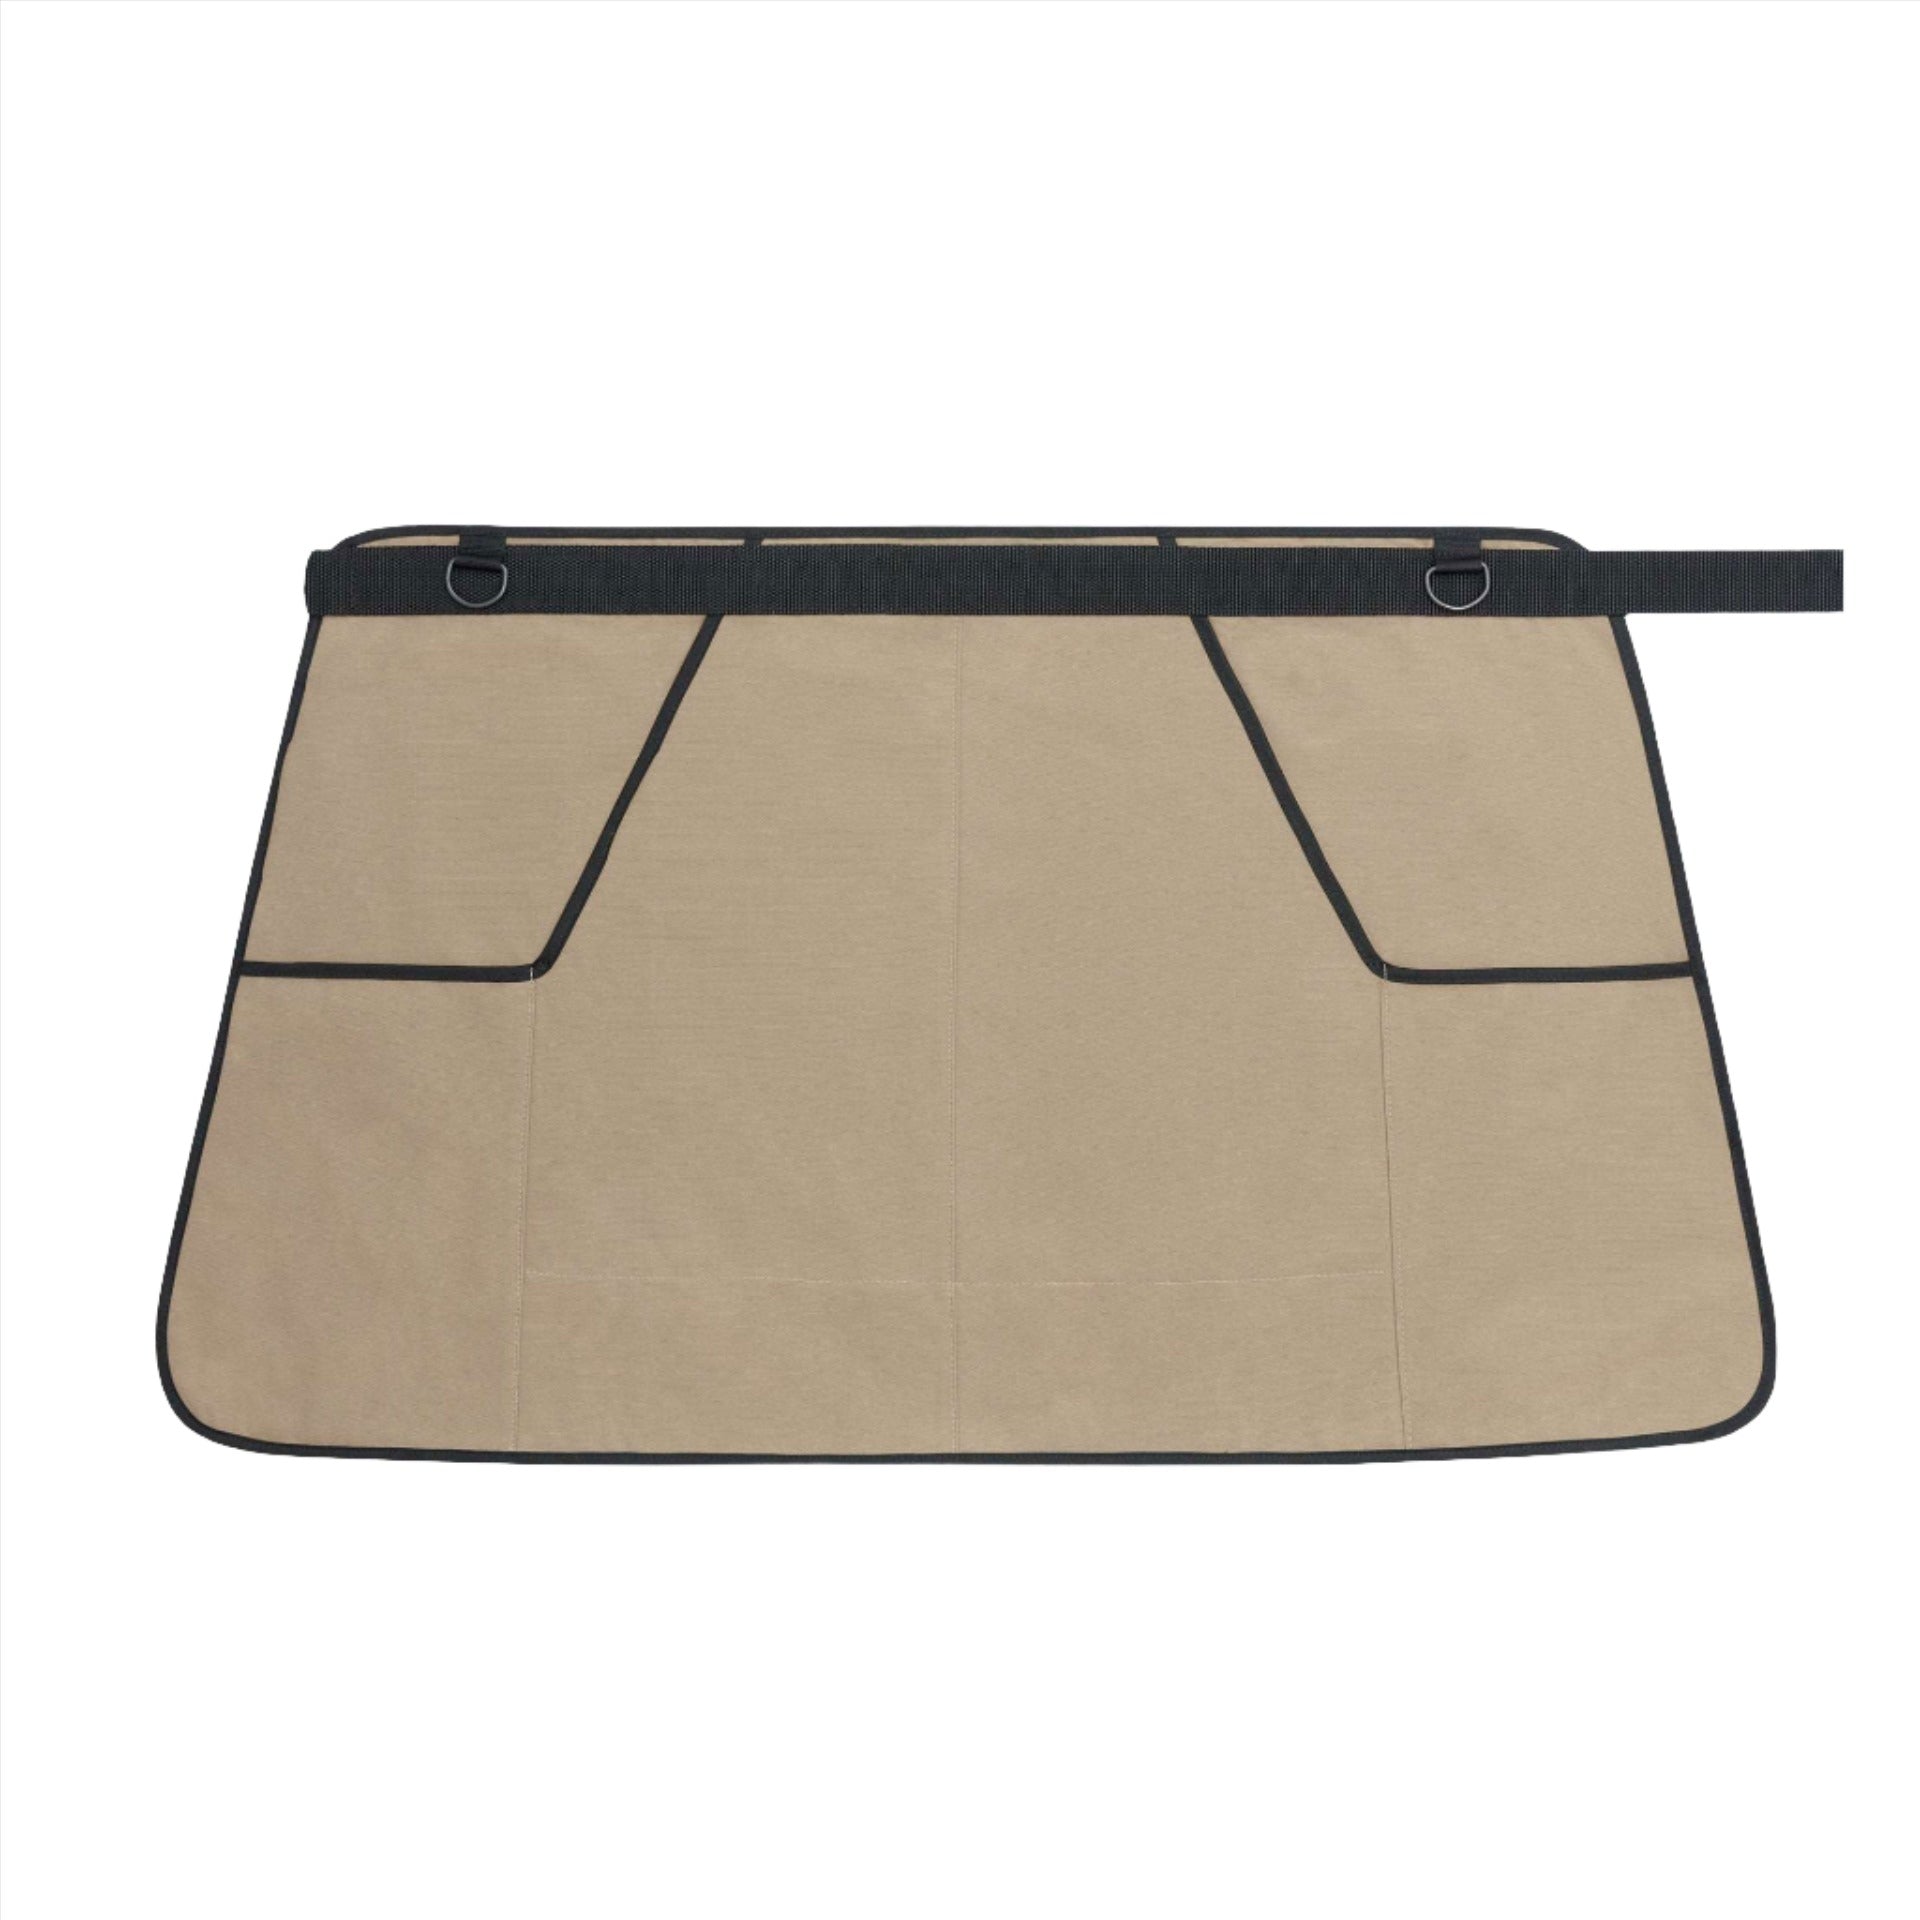 tailgater-grilling-apron-camel-open